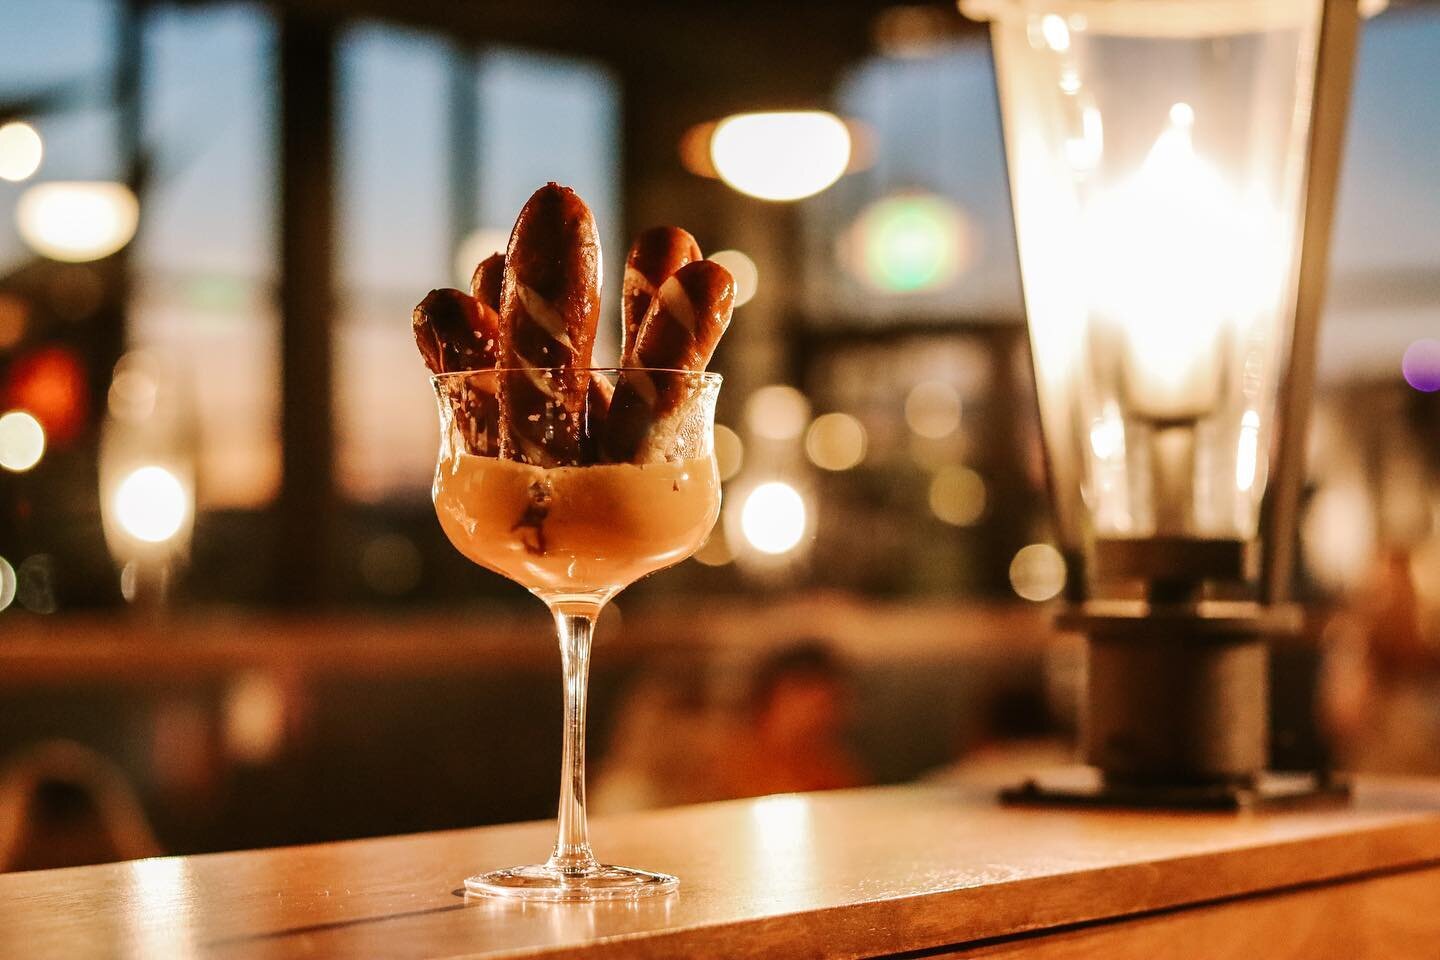 Have you tried any of our Bites yet? Our soft Pretzel Coupe featuring pretzel baguettes with warm beer cheese is a fan favorite 🥨